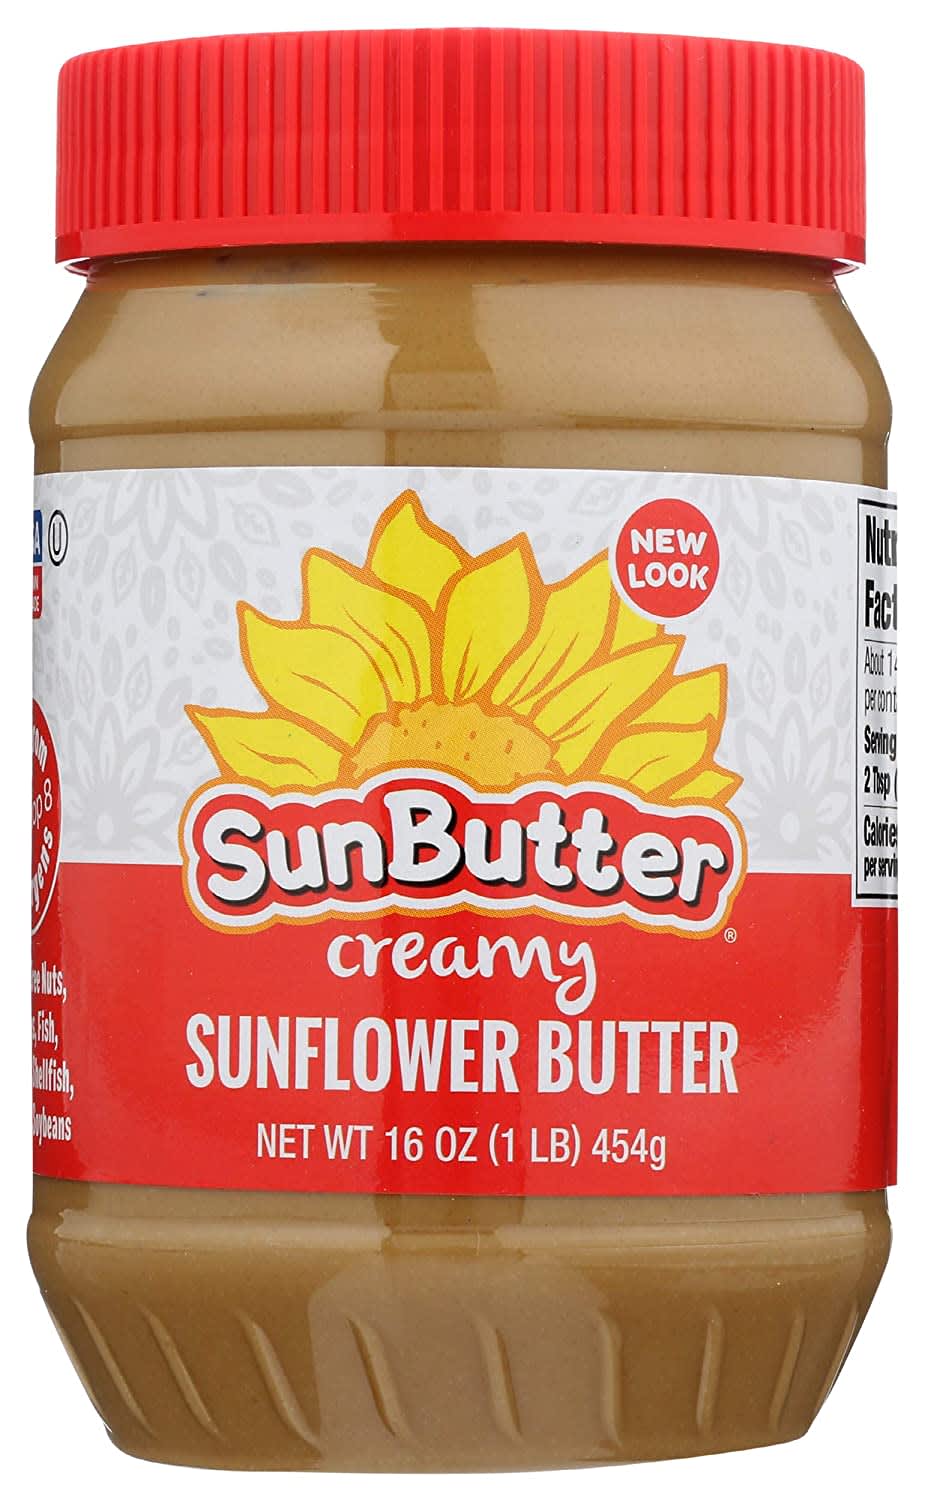 https://cdn.apartmenttherapy.info/image/upload/v1660313975/k/Edit/2022-08-Day-Care-Workers-Grocery-Recommendations/sunbutter.jpg